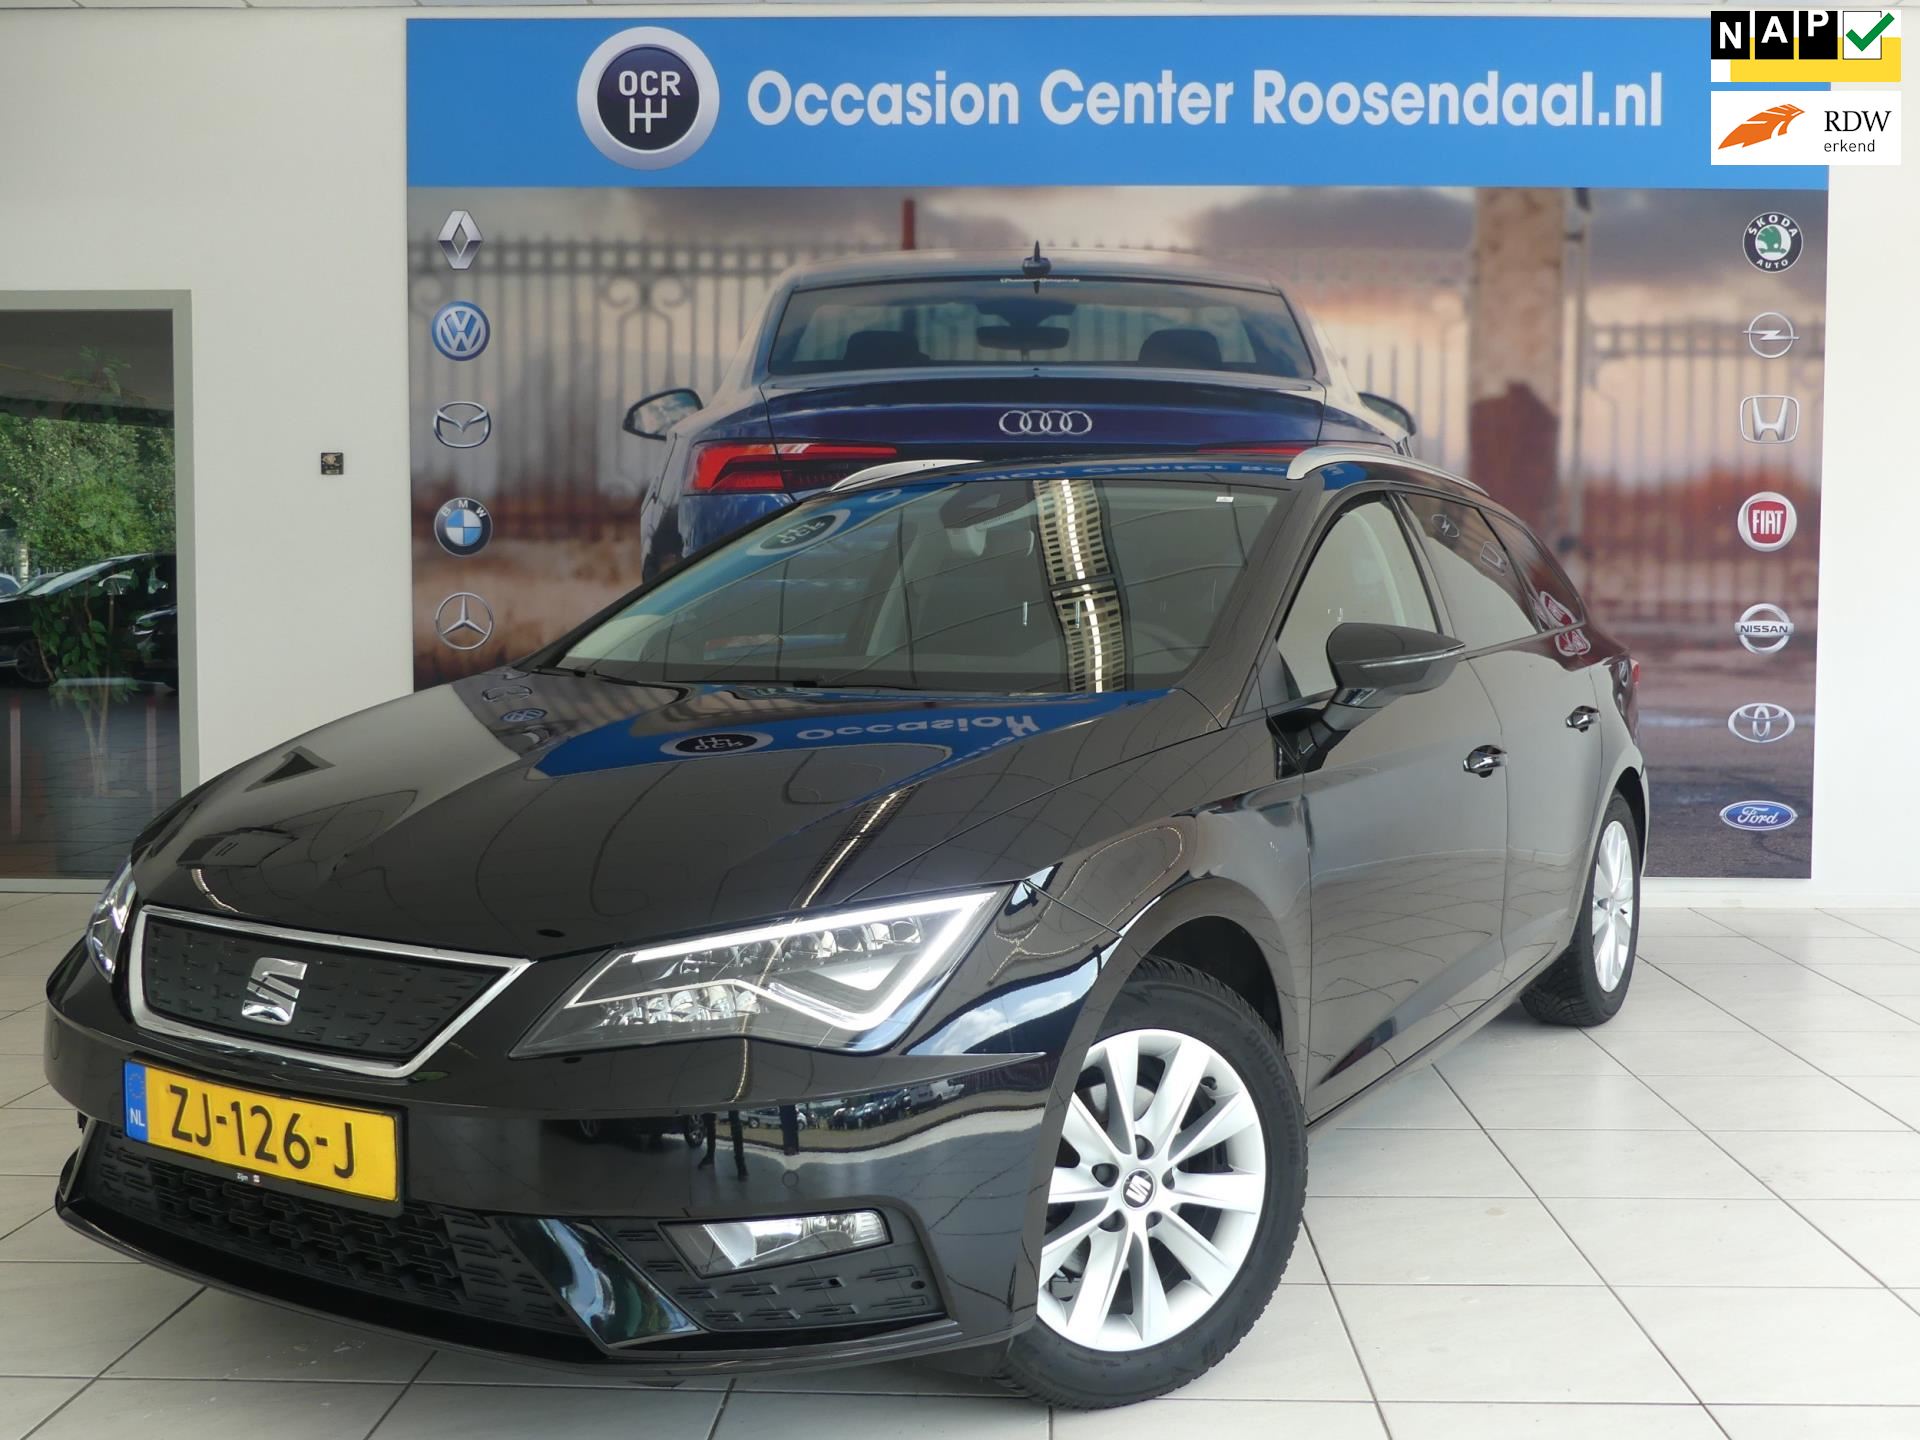 Seat Leon ST occasion - Occasion Center Roosendaal